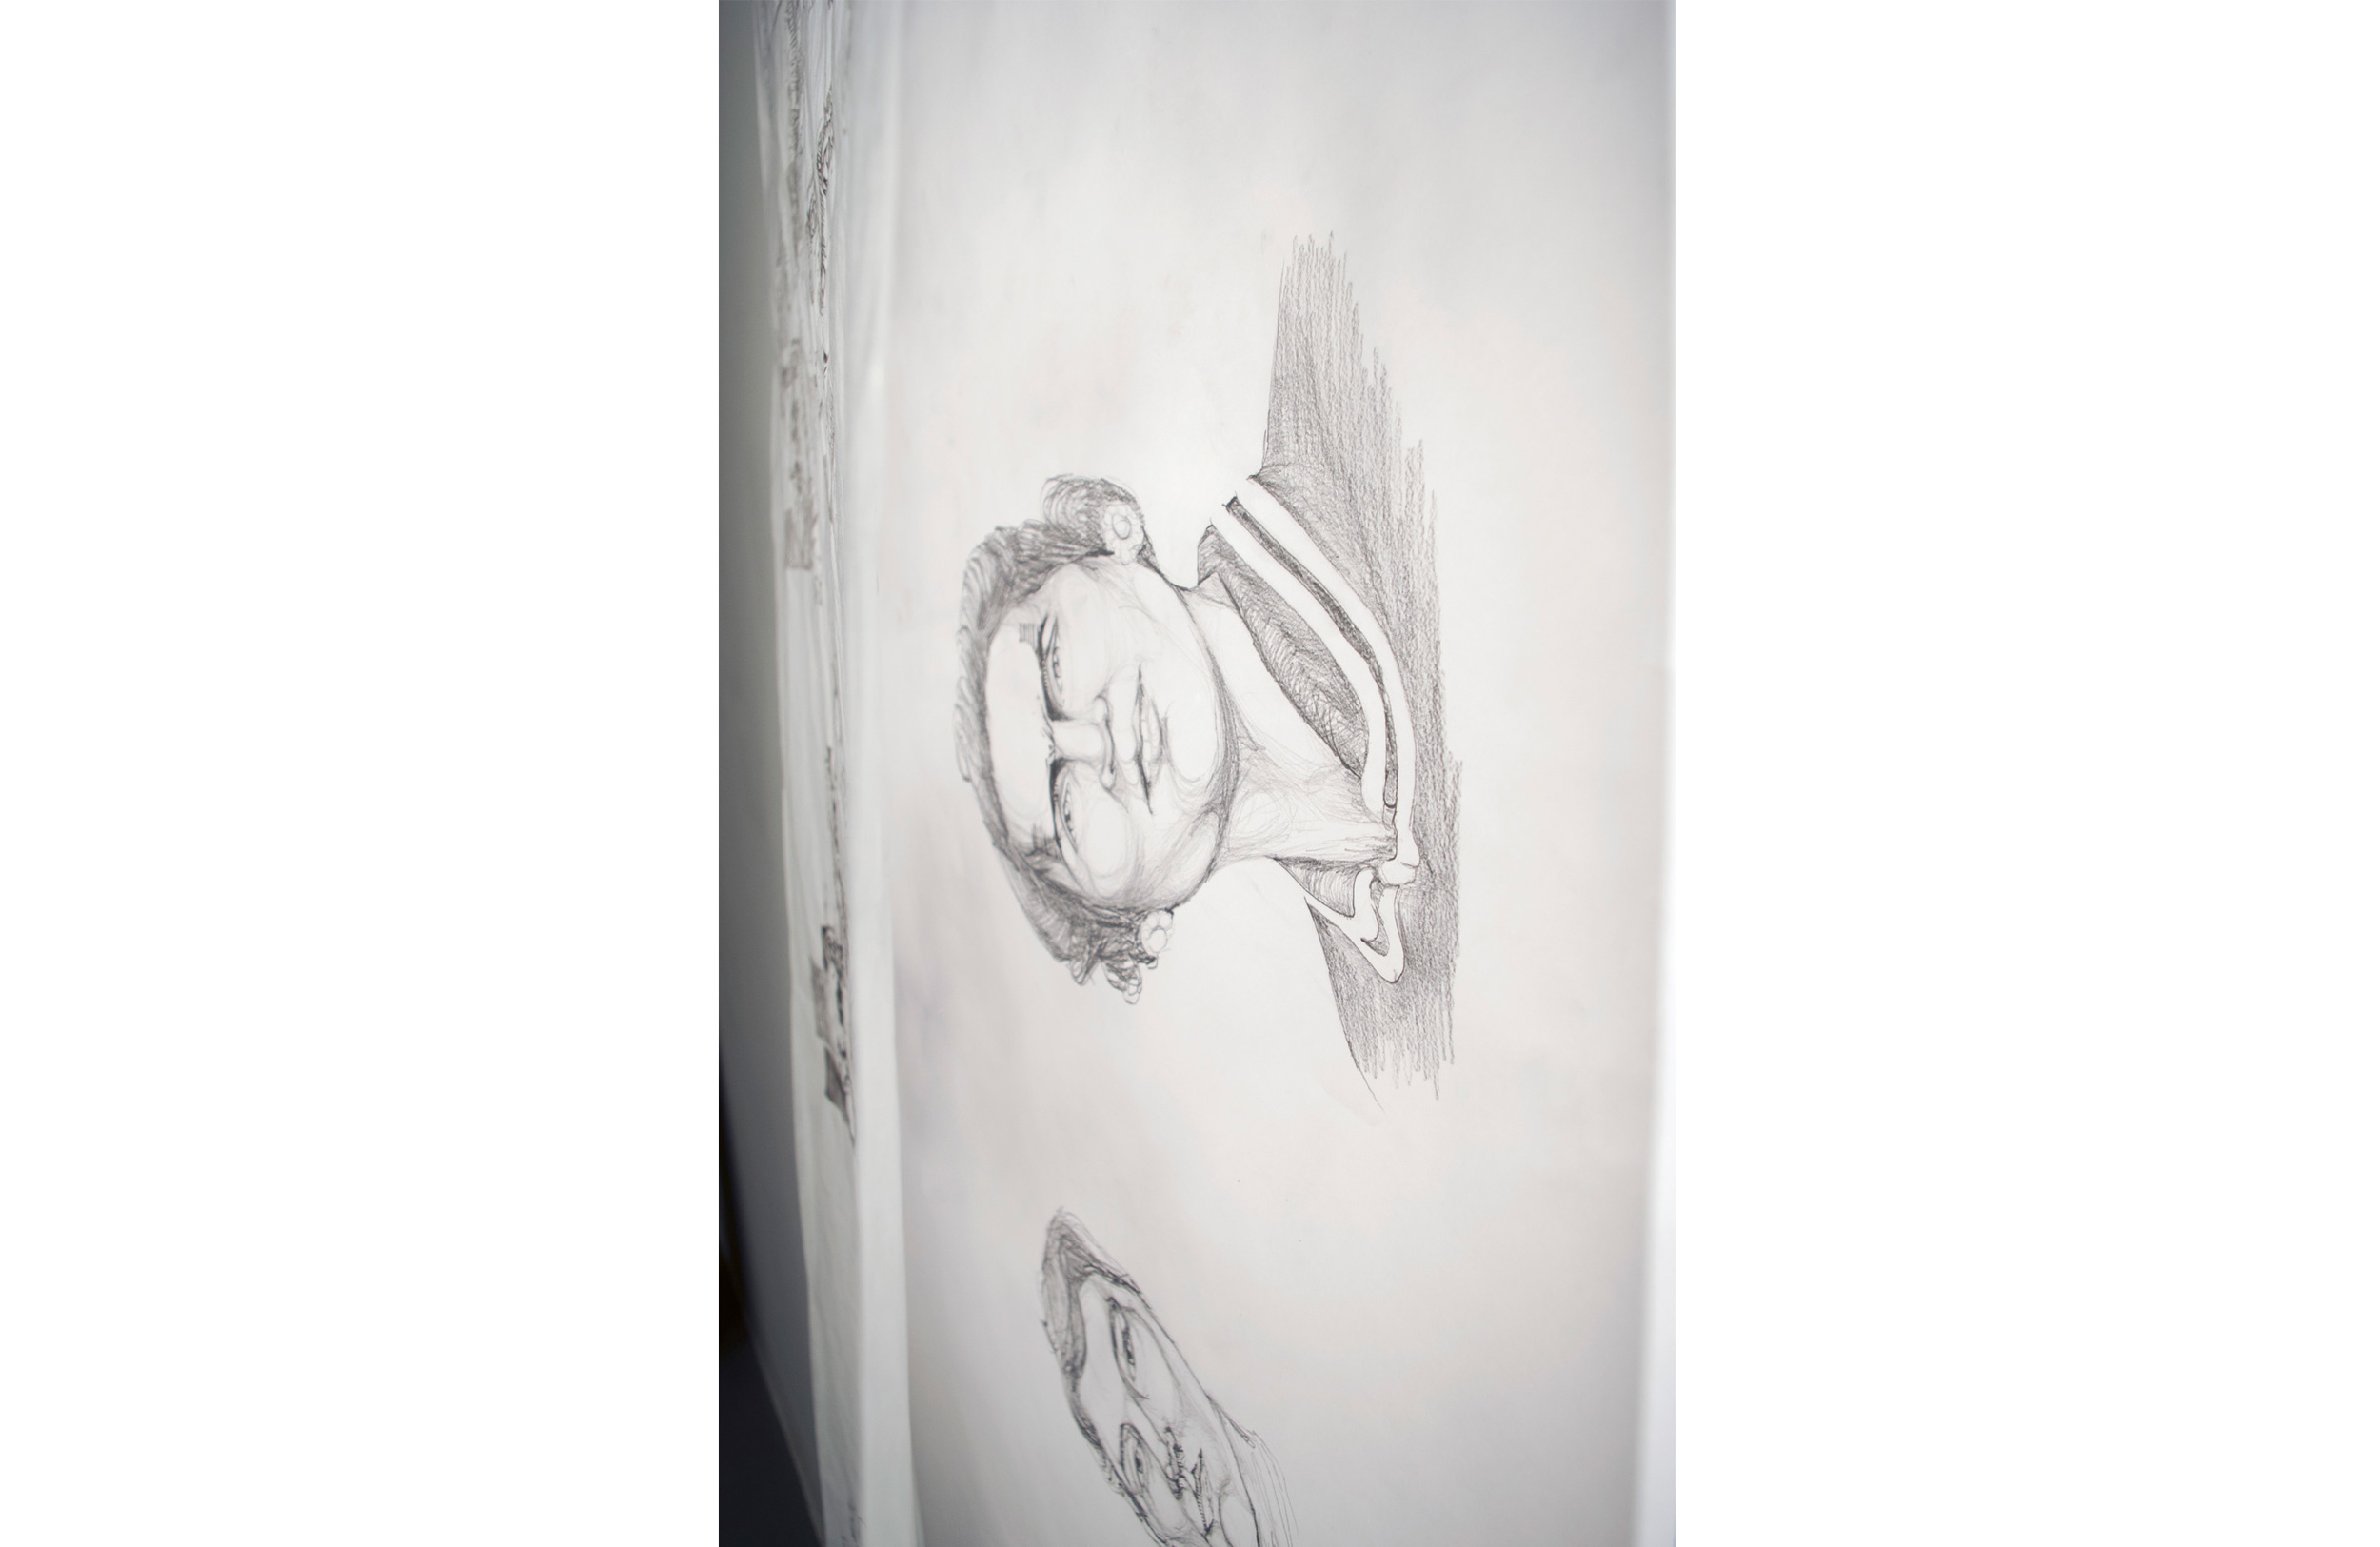  Two rolls of paper hang from above, with prints on the transparent layer and pencil drawings beneath. 